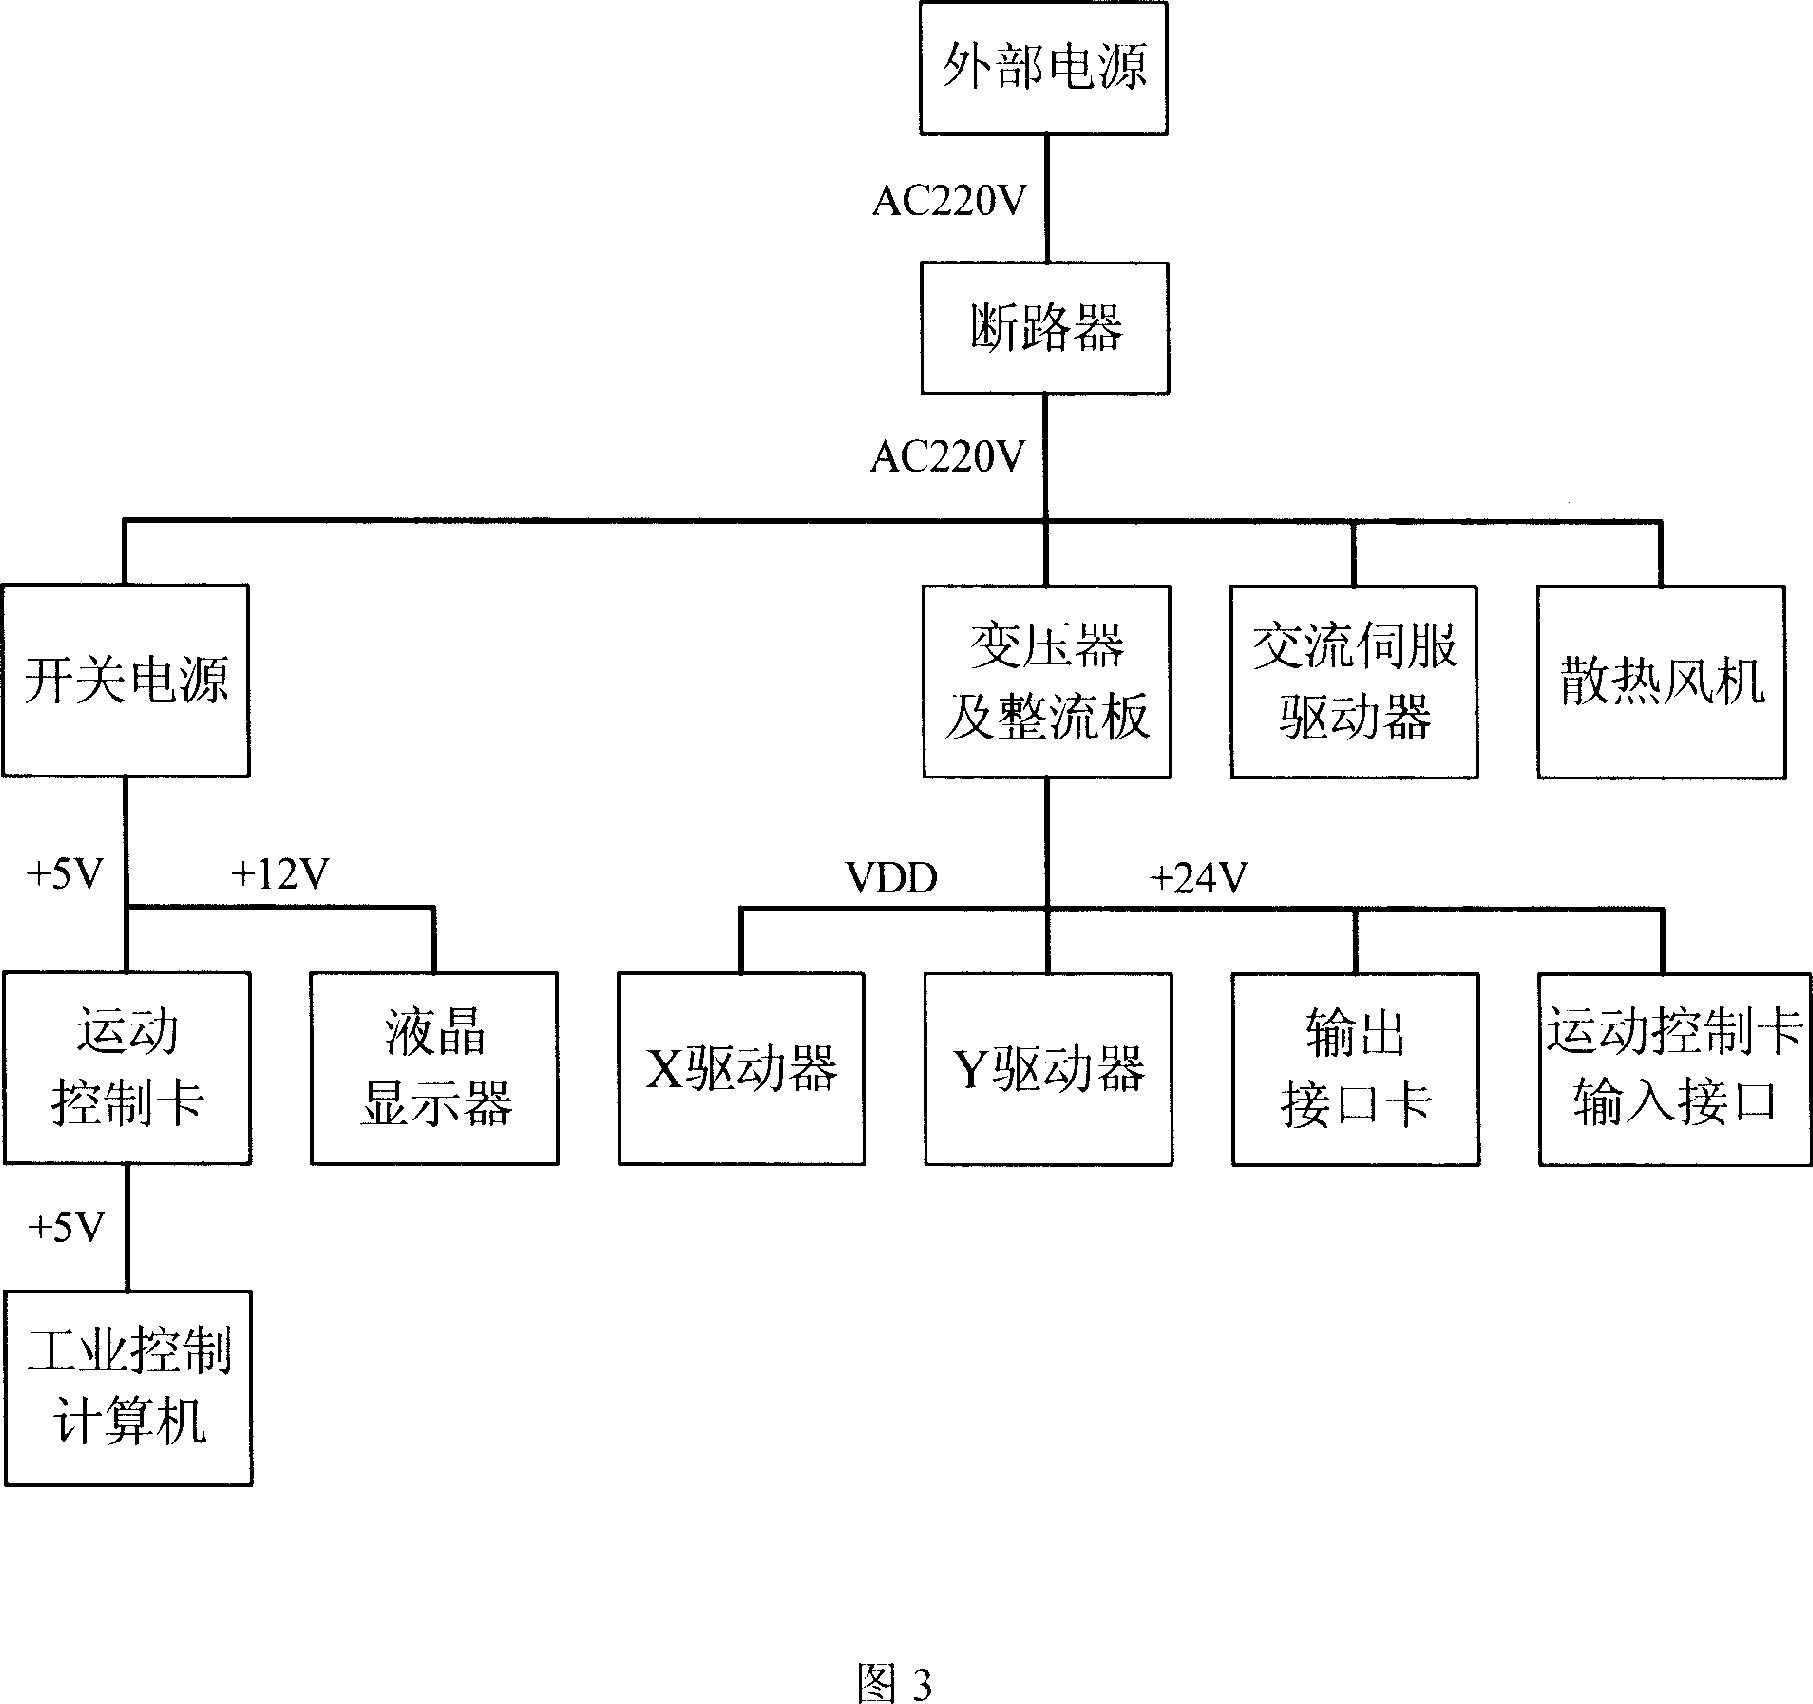 Computer control system of industrial sewing machine